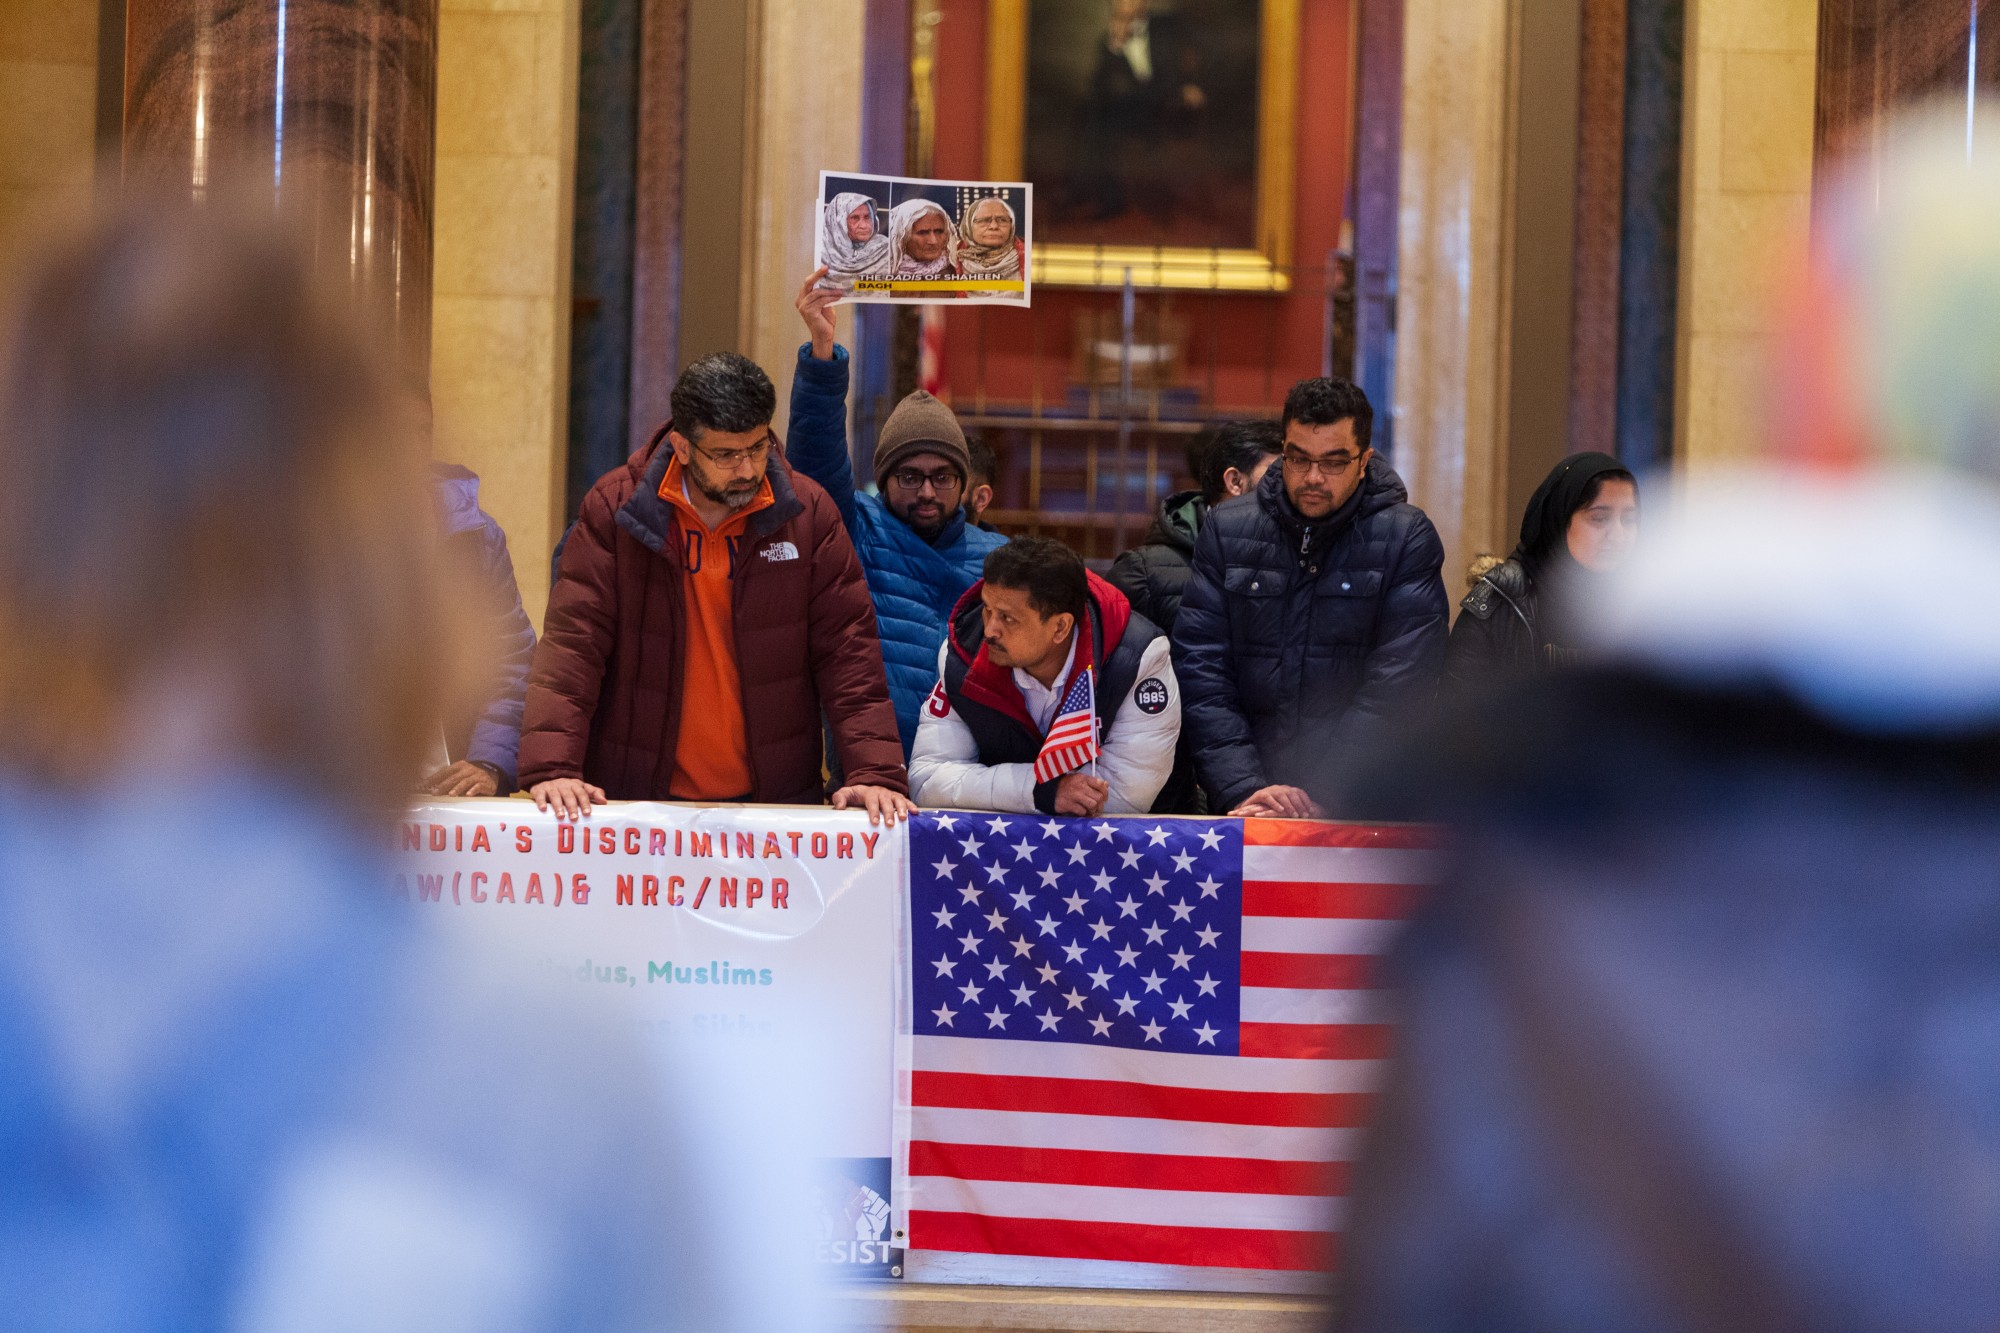 Protestors drape a U.S. flag over the balcony of the rotunda at an event opposing Indias recent passage of the Citizenship Amendment Act at the Minnesota State Capitol Building on Sunday, Jan. 26. This legislation offers Indian citizenship to refugees of several religious groups, but does not apply to Muslims, despite their making up nearly 15% of the Indian population.